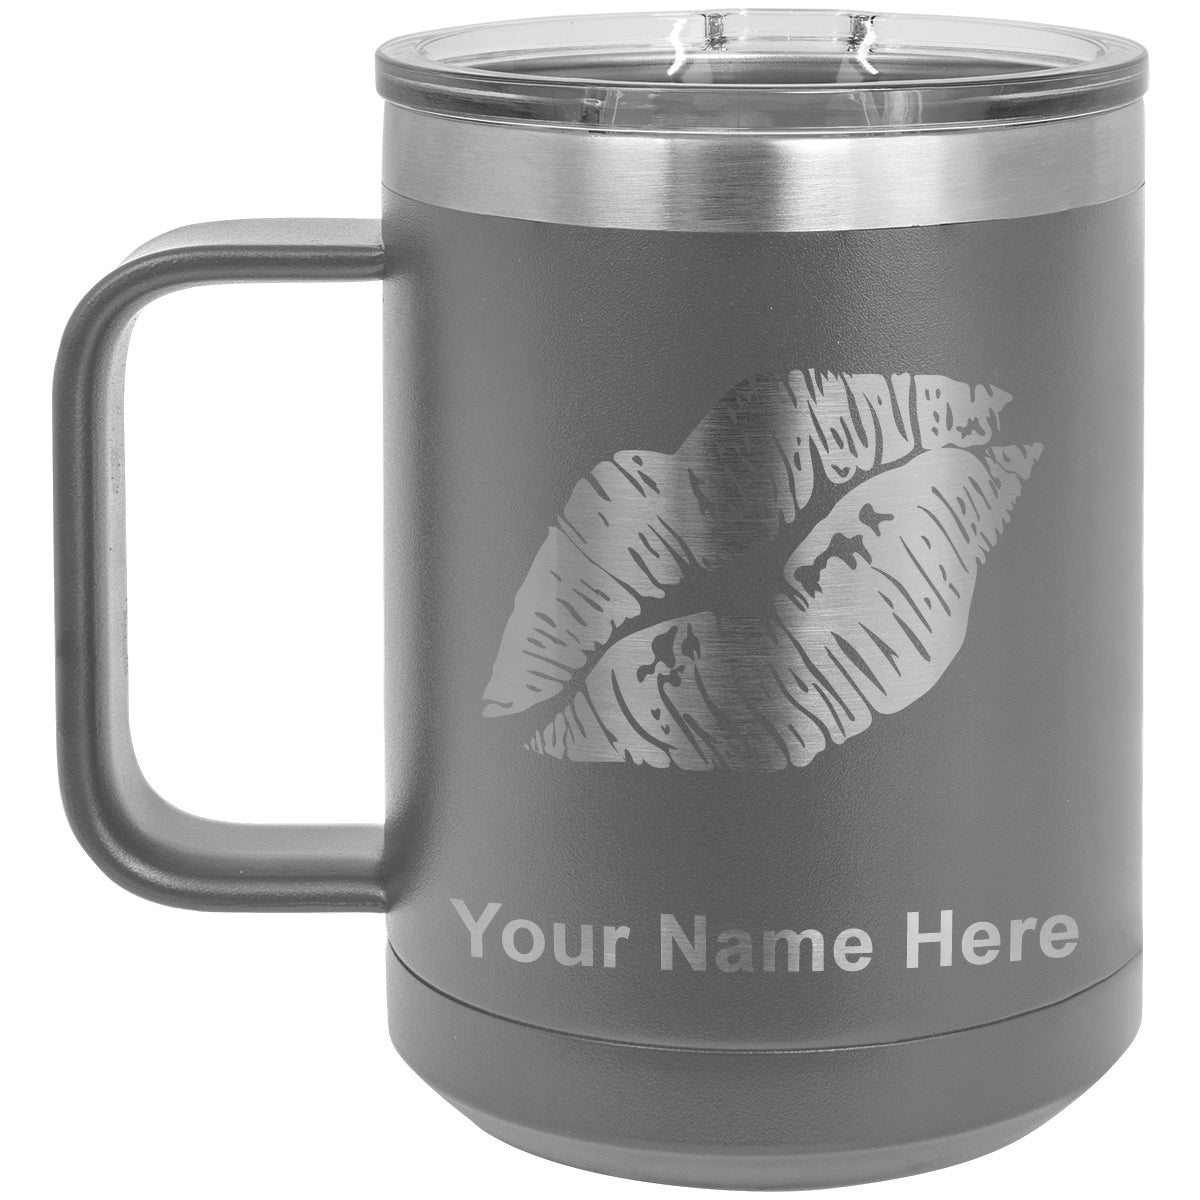 15oz Vacuum Insulated Coffee Mug, Lipstick Kiss, Personalized Engraving Included